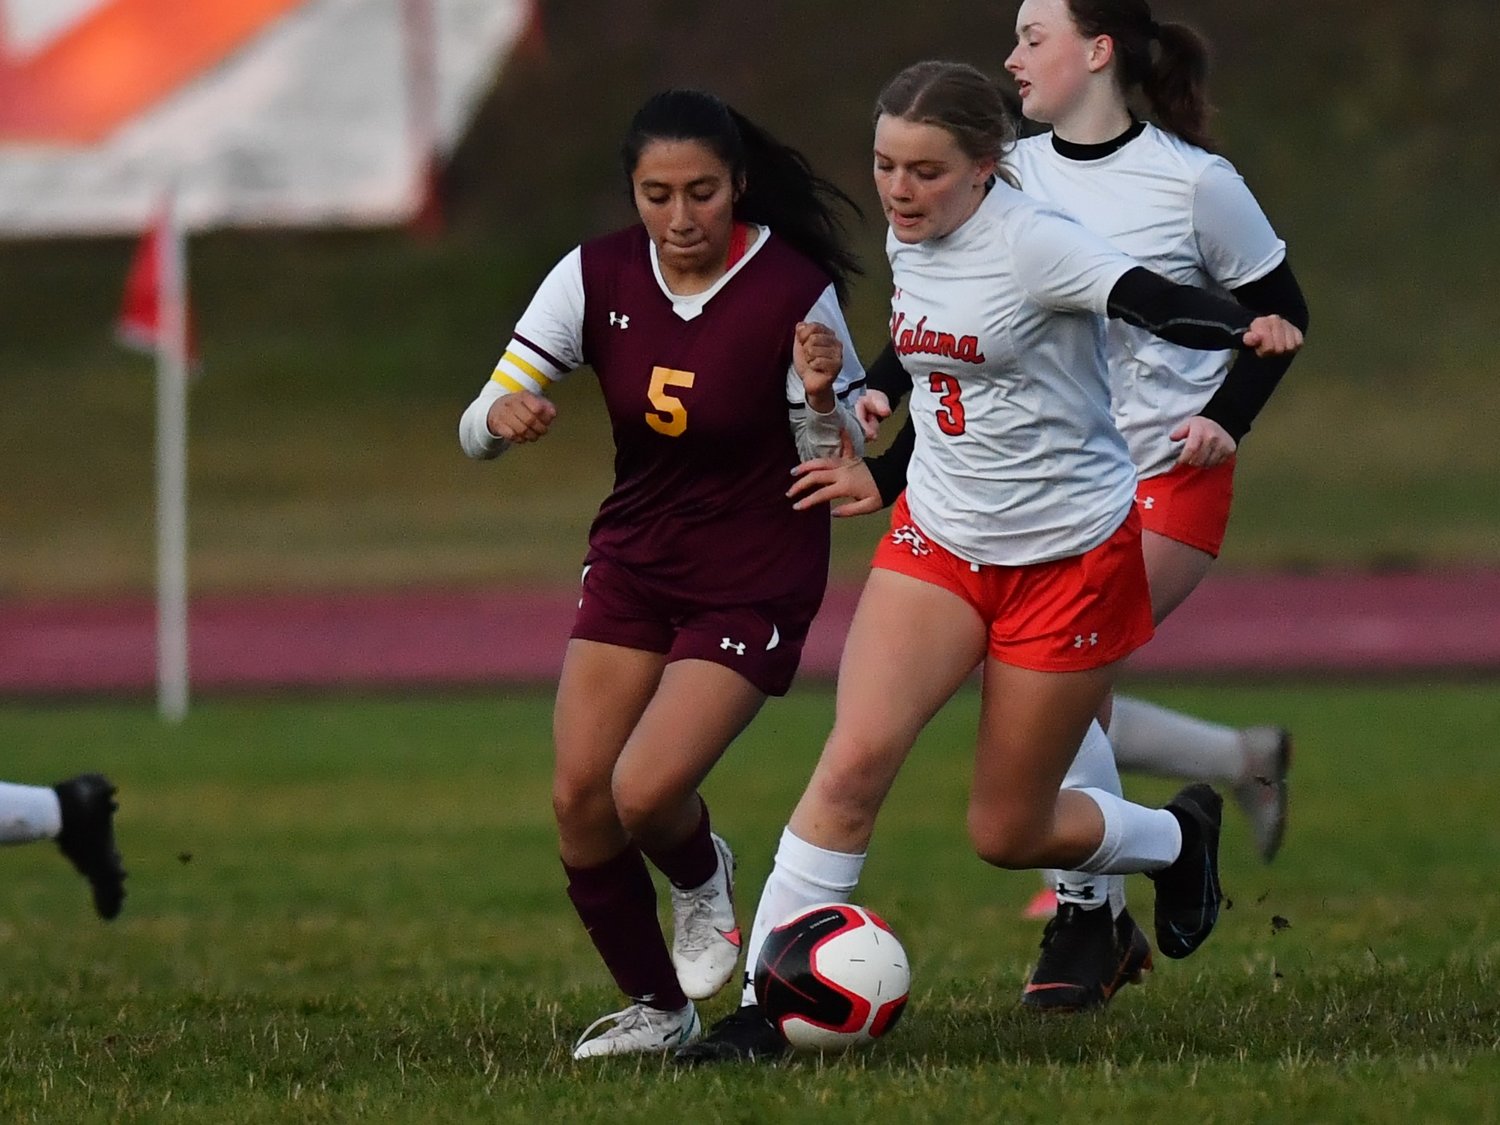 Winlock’s Angela Gil-Munoz fights for possession against Kalama’s Josie Brandenburg in the second half of the Chinooks’ 8-0 win over the Cardinals on Sept. 27.